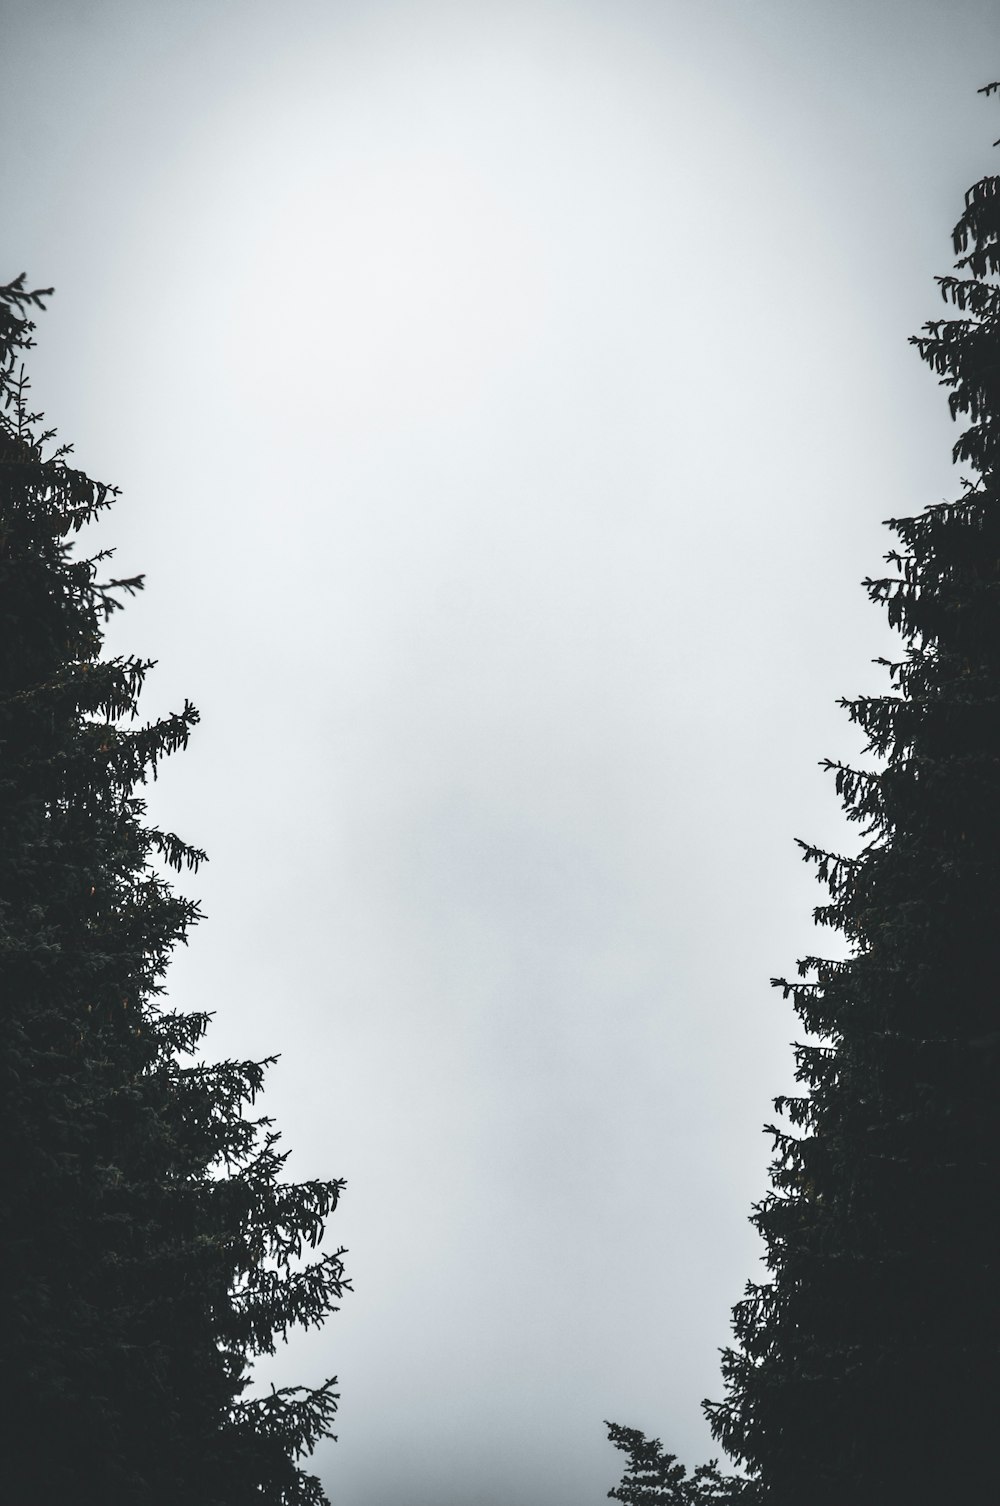 trees and a cloudy sky